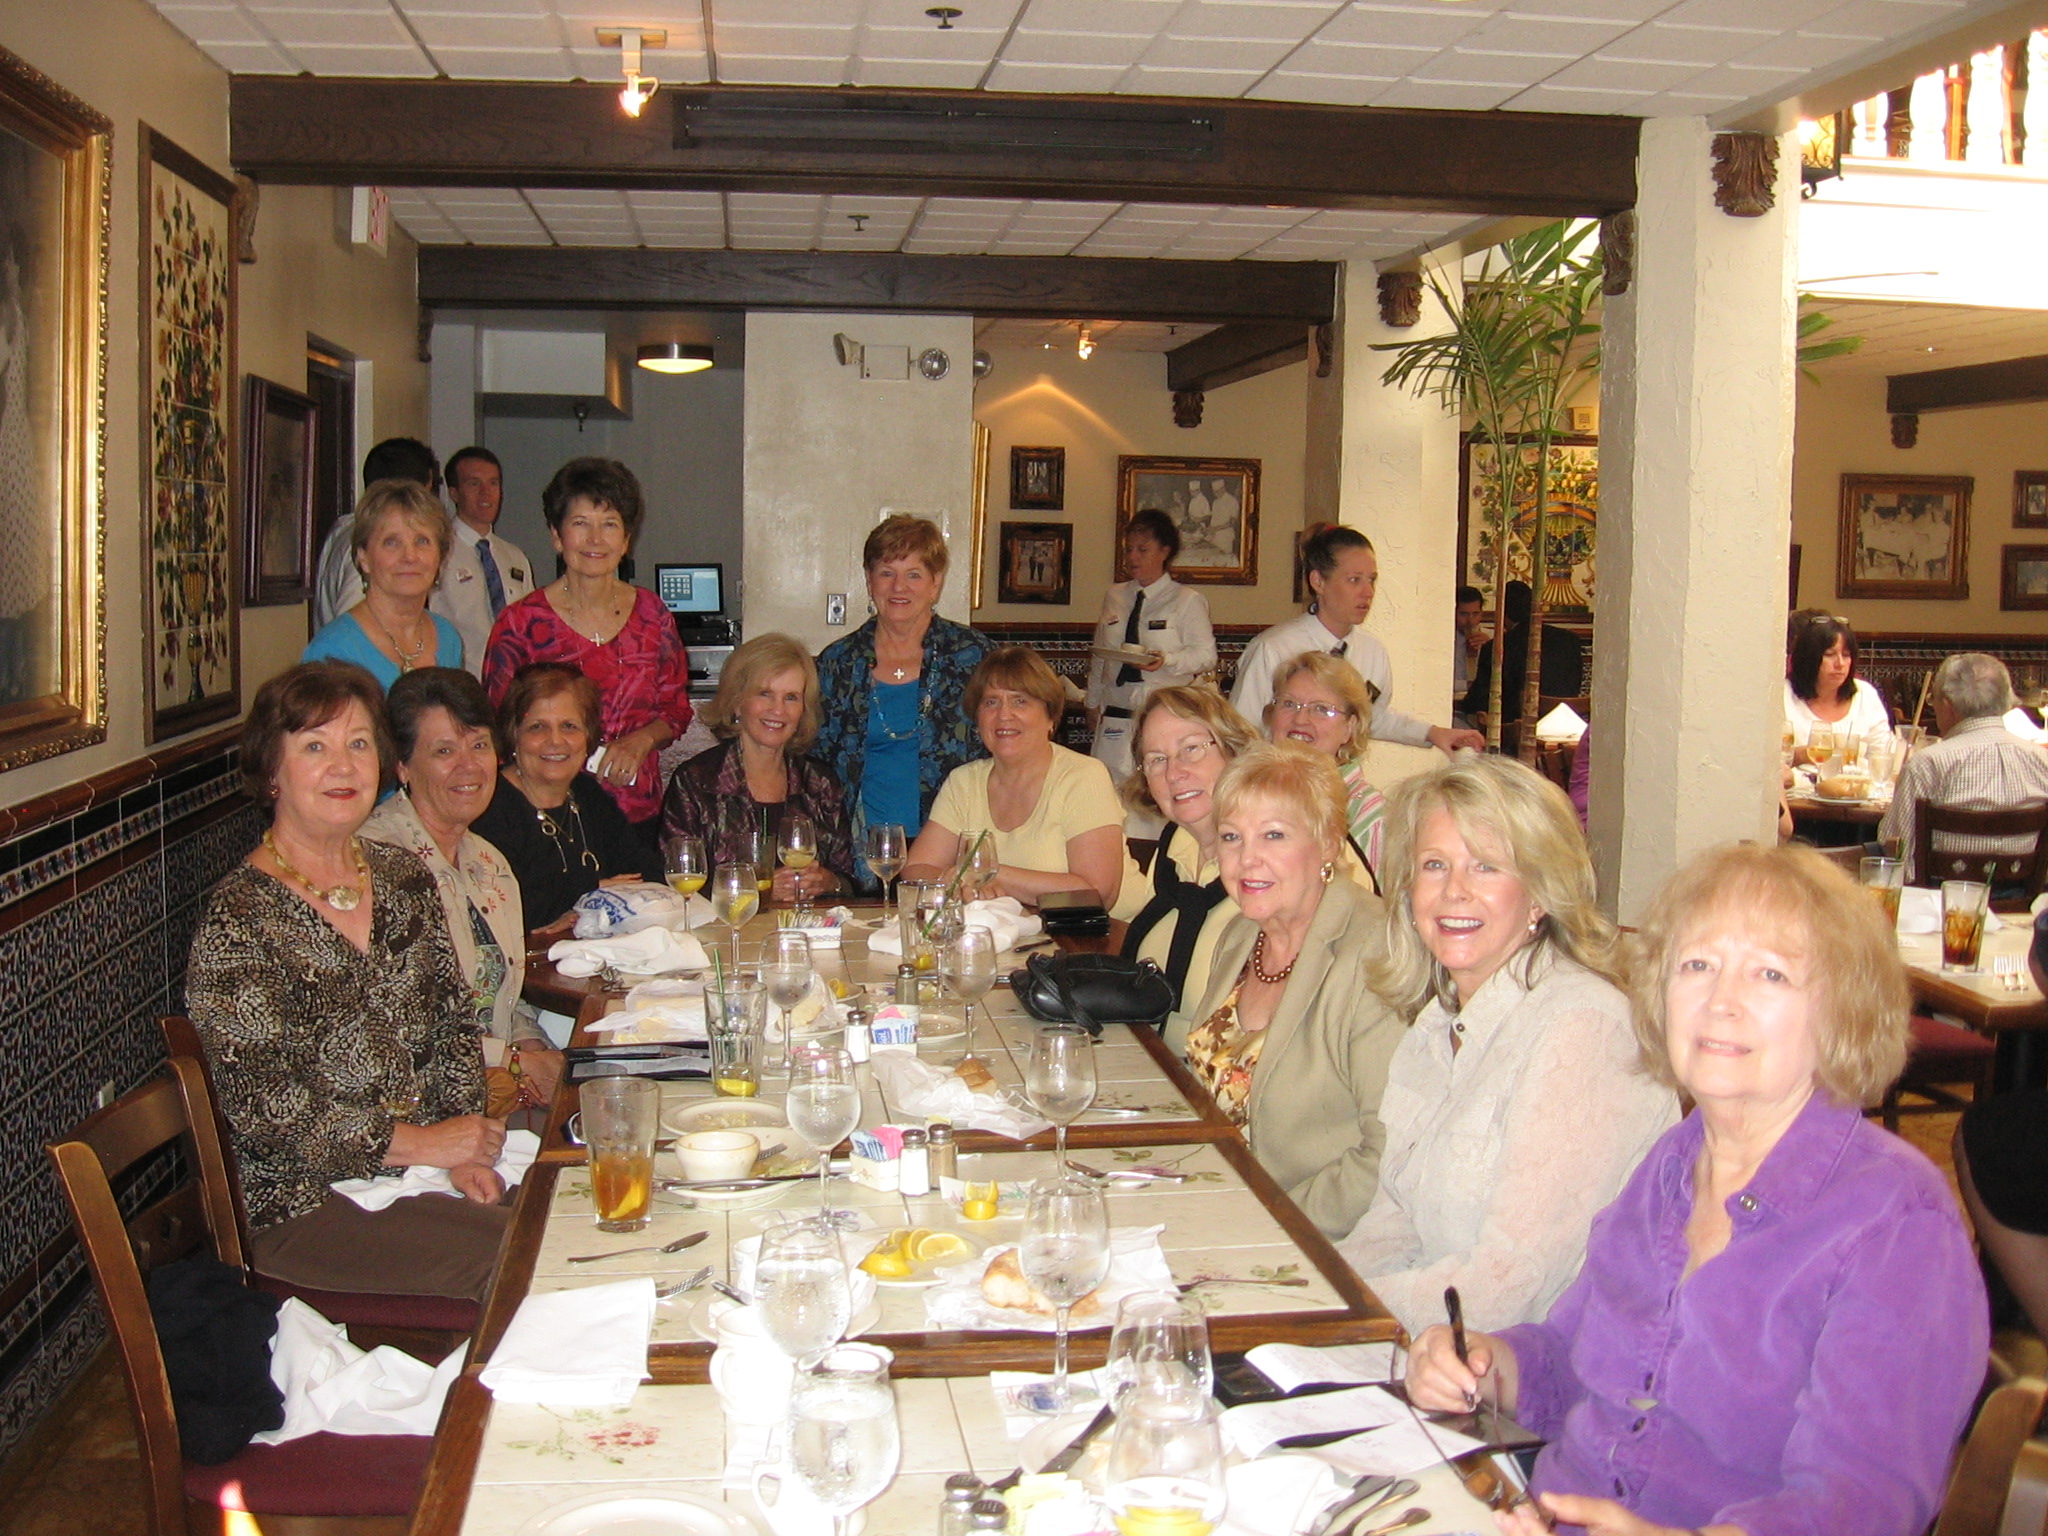 Ladies' lunch gathering at the Columbia in St. Augustine, November 15, 2011.  From left to right:  Elaine Hazlehurst Rae, Faye Johnson Barrow, Loretta Gay Weirauch, Madelaine Mackoul Cosgrove, Mary Kay Cowart Montford, Patsy Rhodes Johnson, Beth Ann LeGat